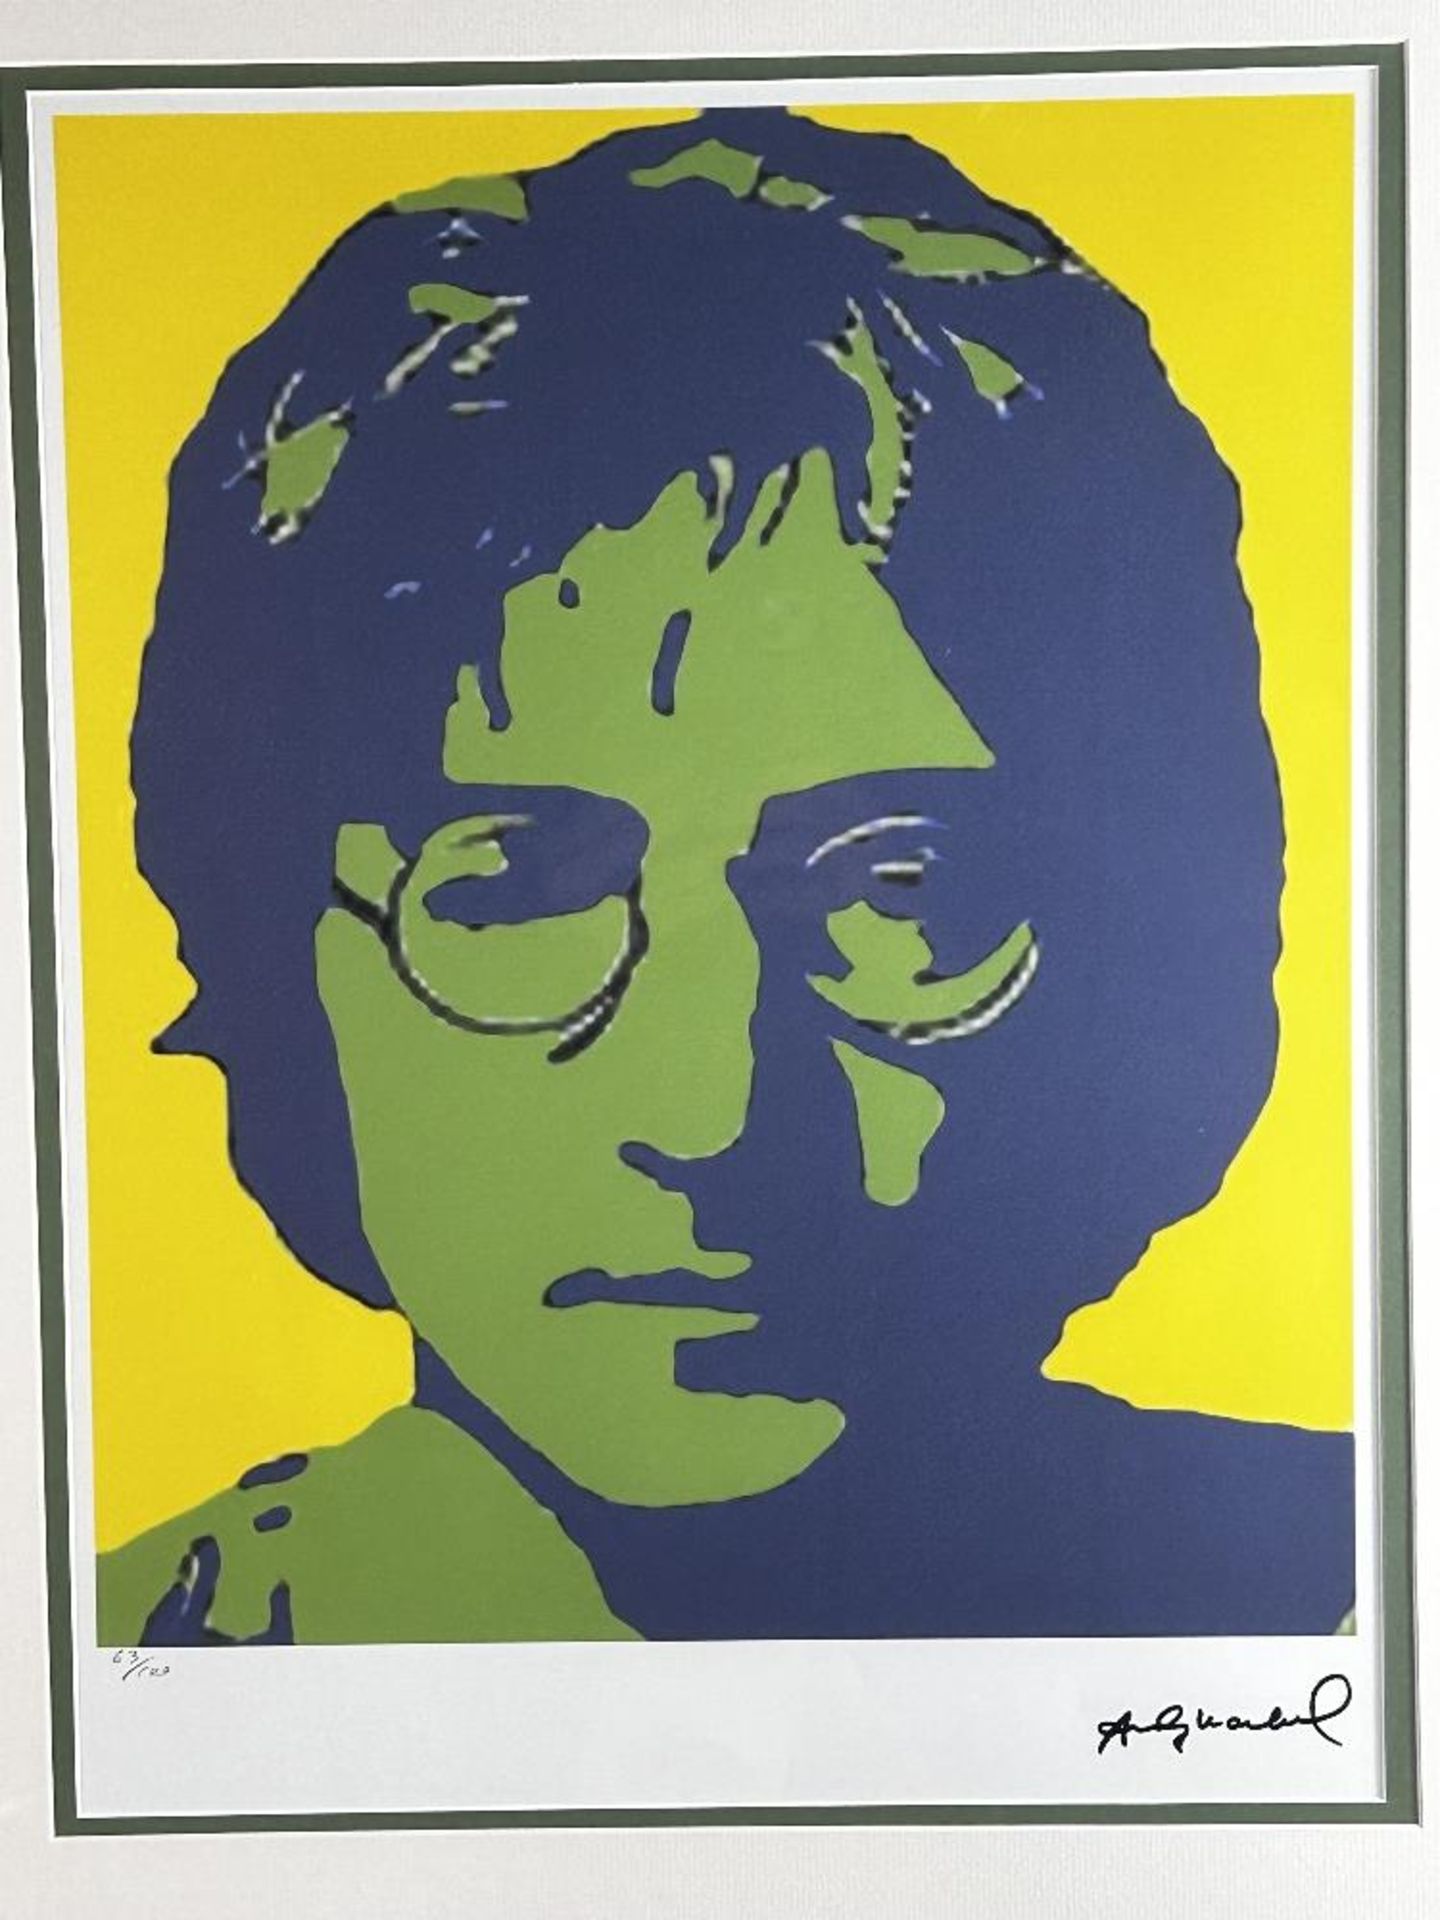 Andy Warhol-(1928-1987) "John Lennon" Numbered Lithograph - Image 2 of 7